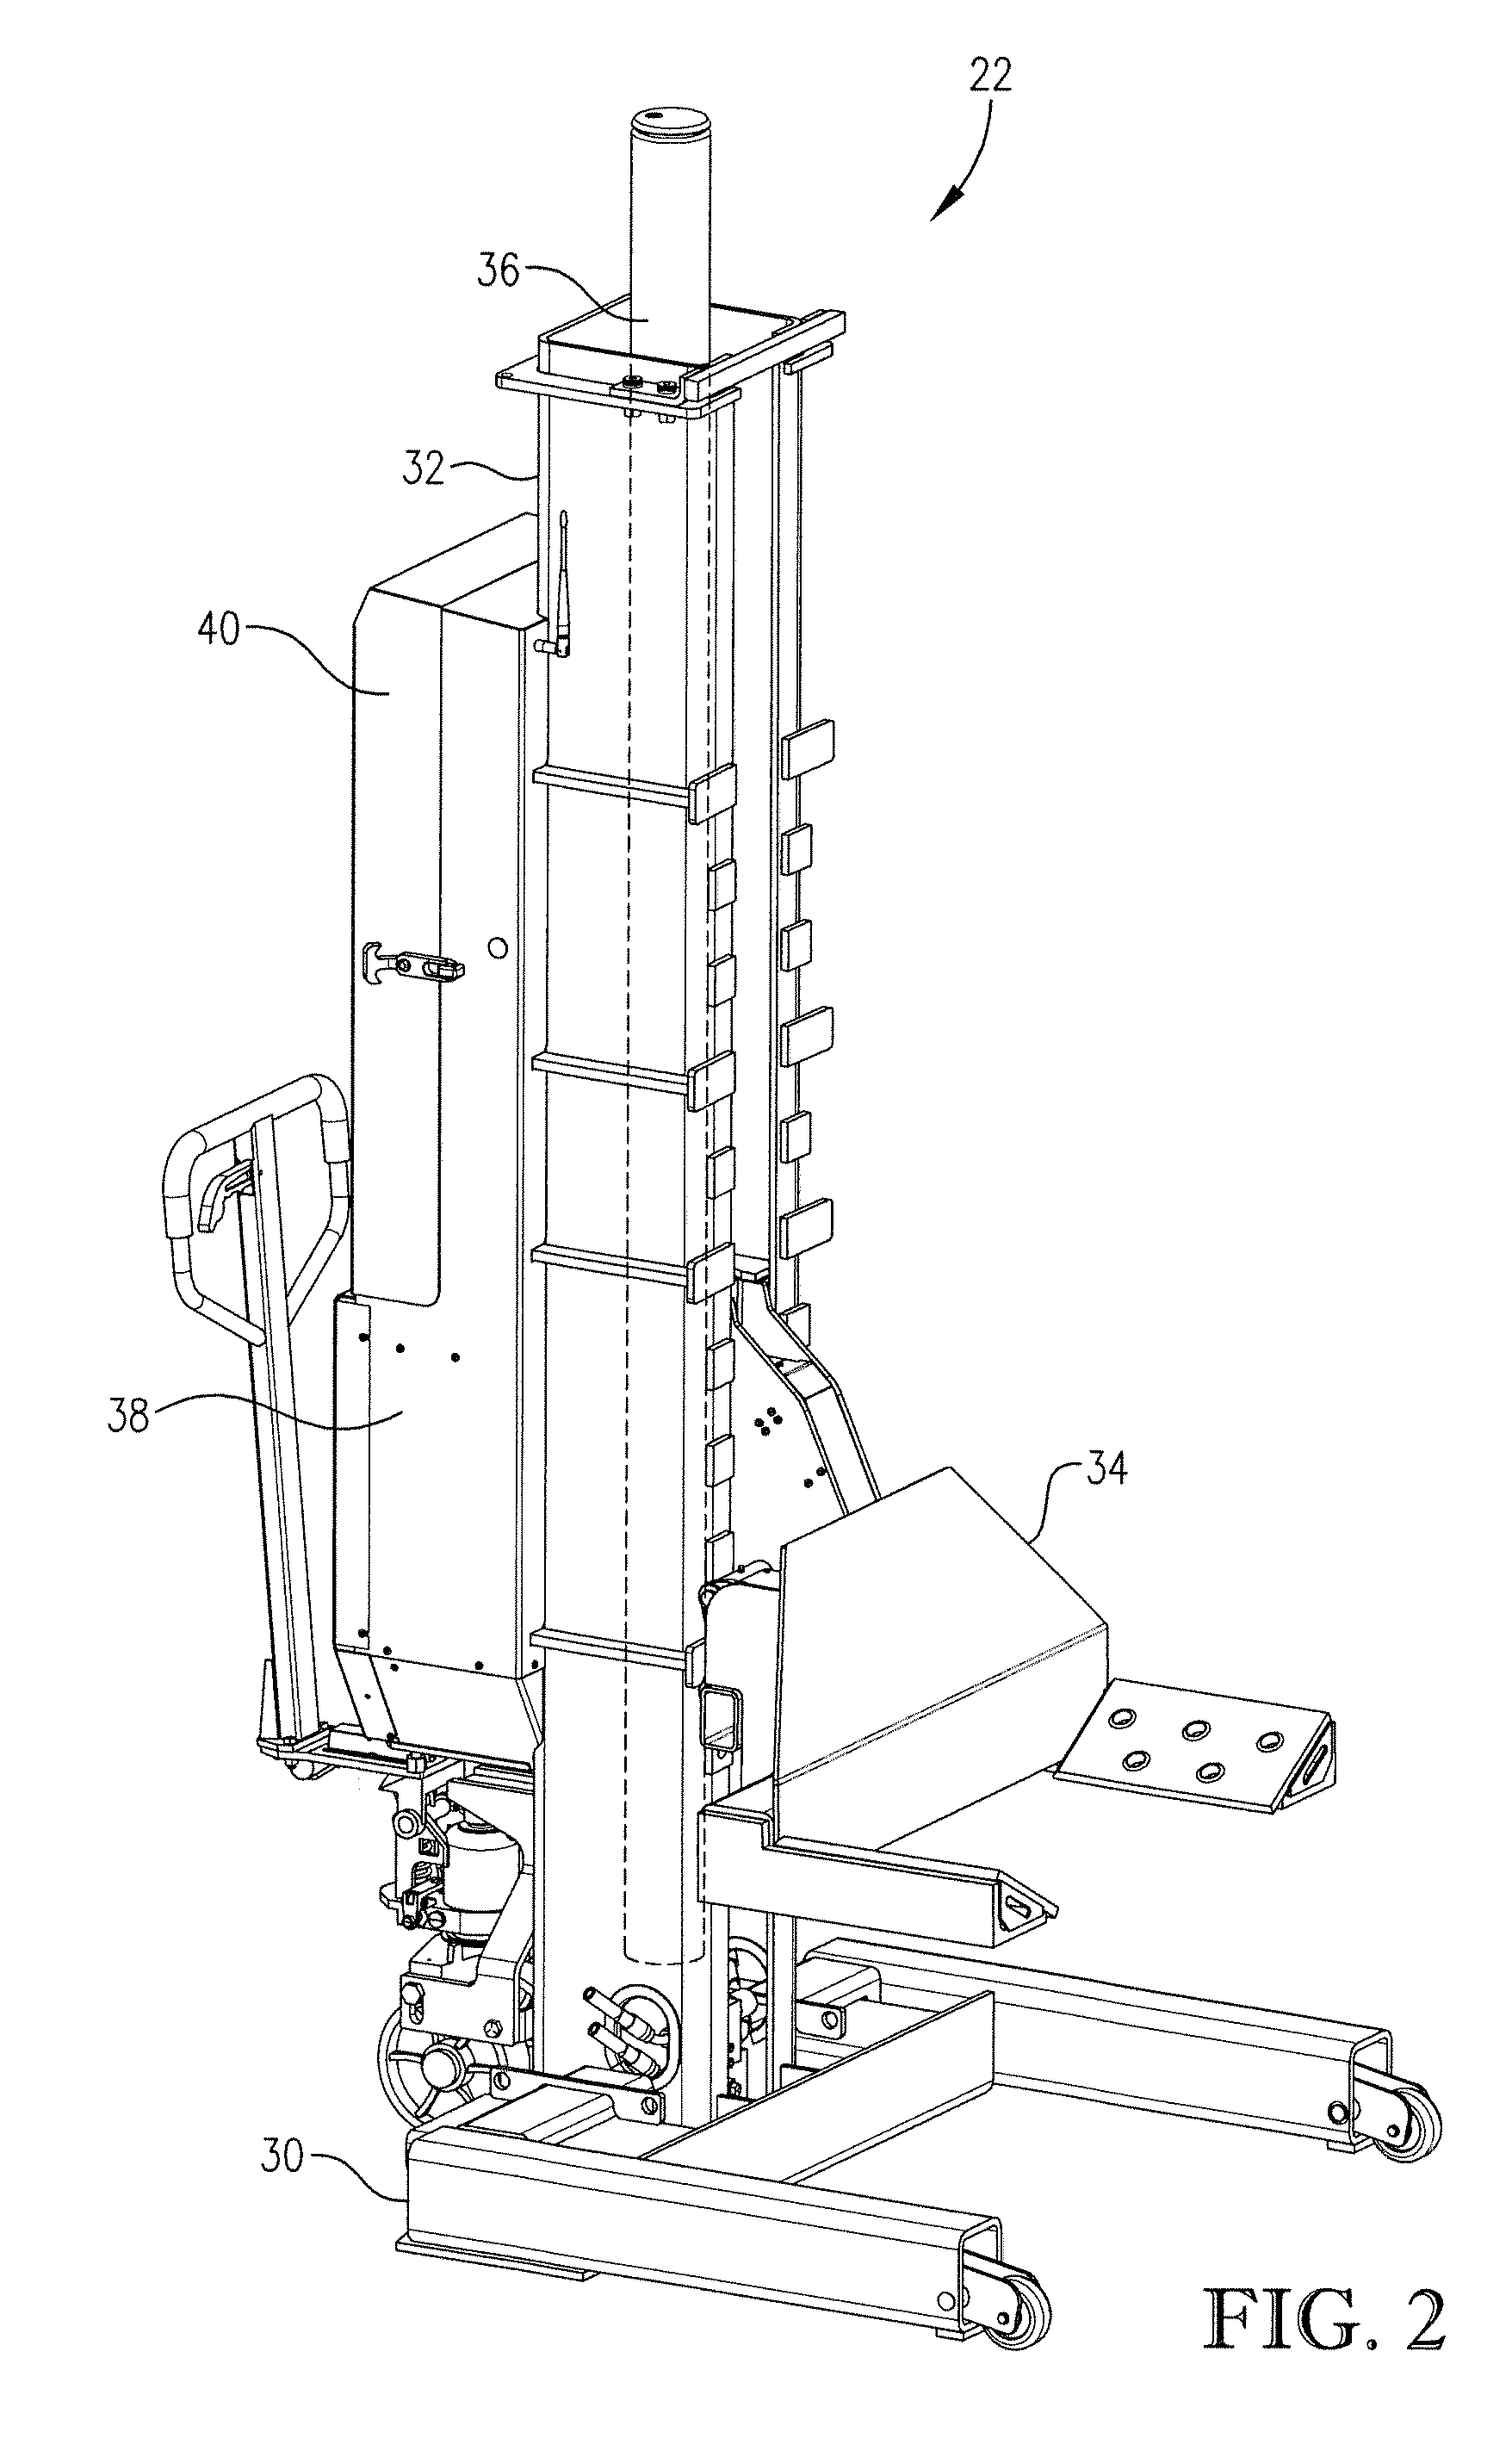 Wireless vehicle lift system with enhanced communication and control